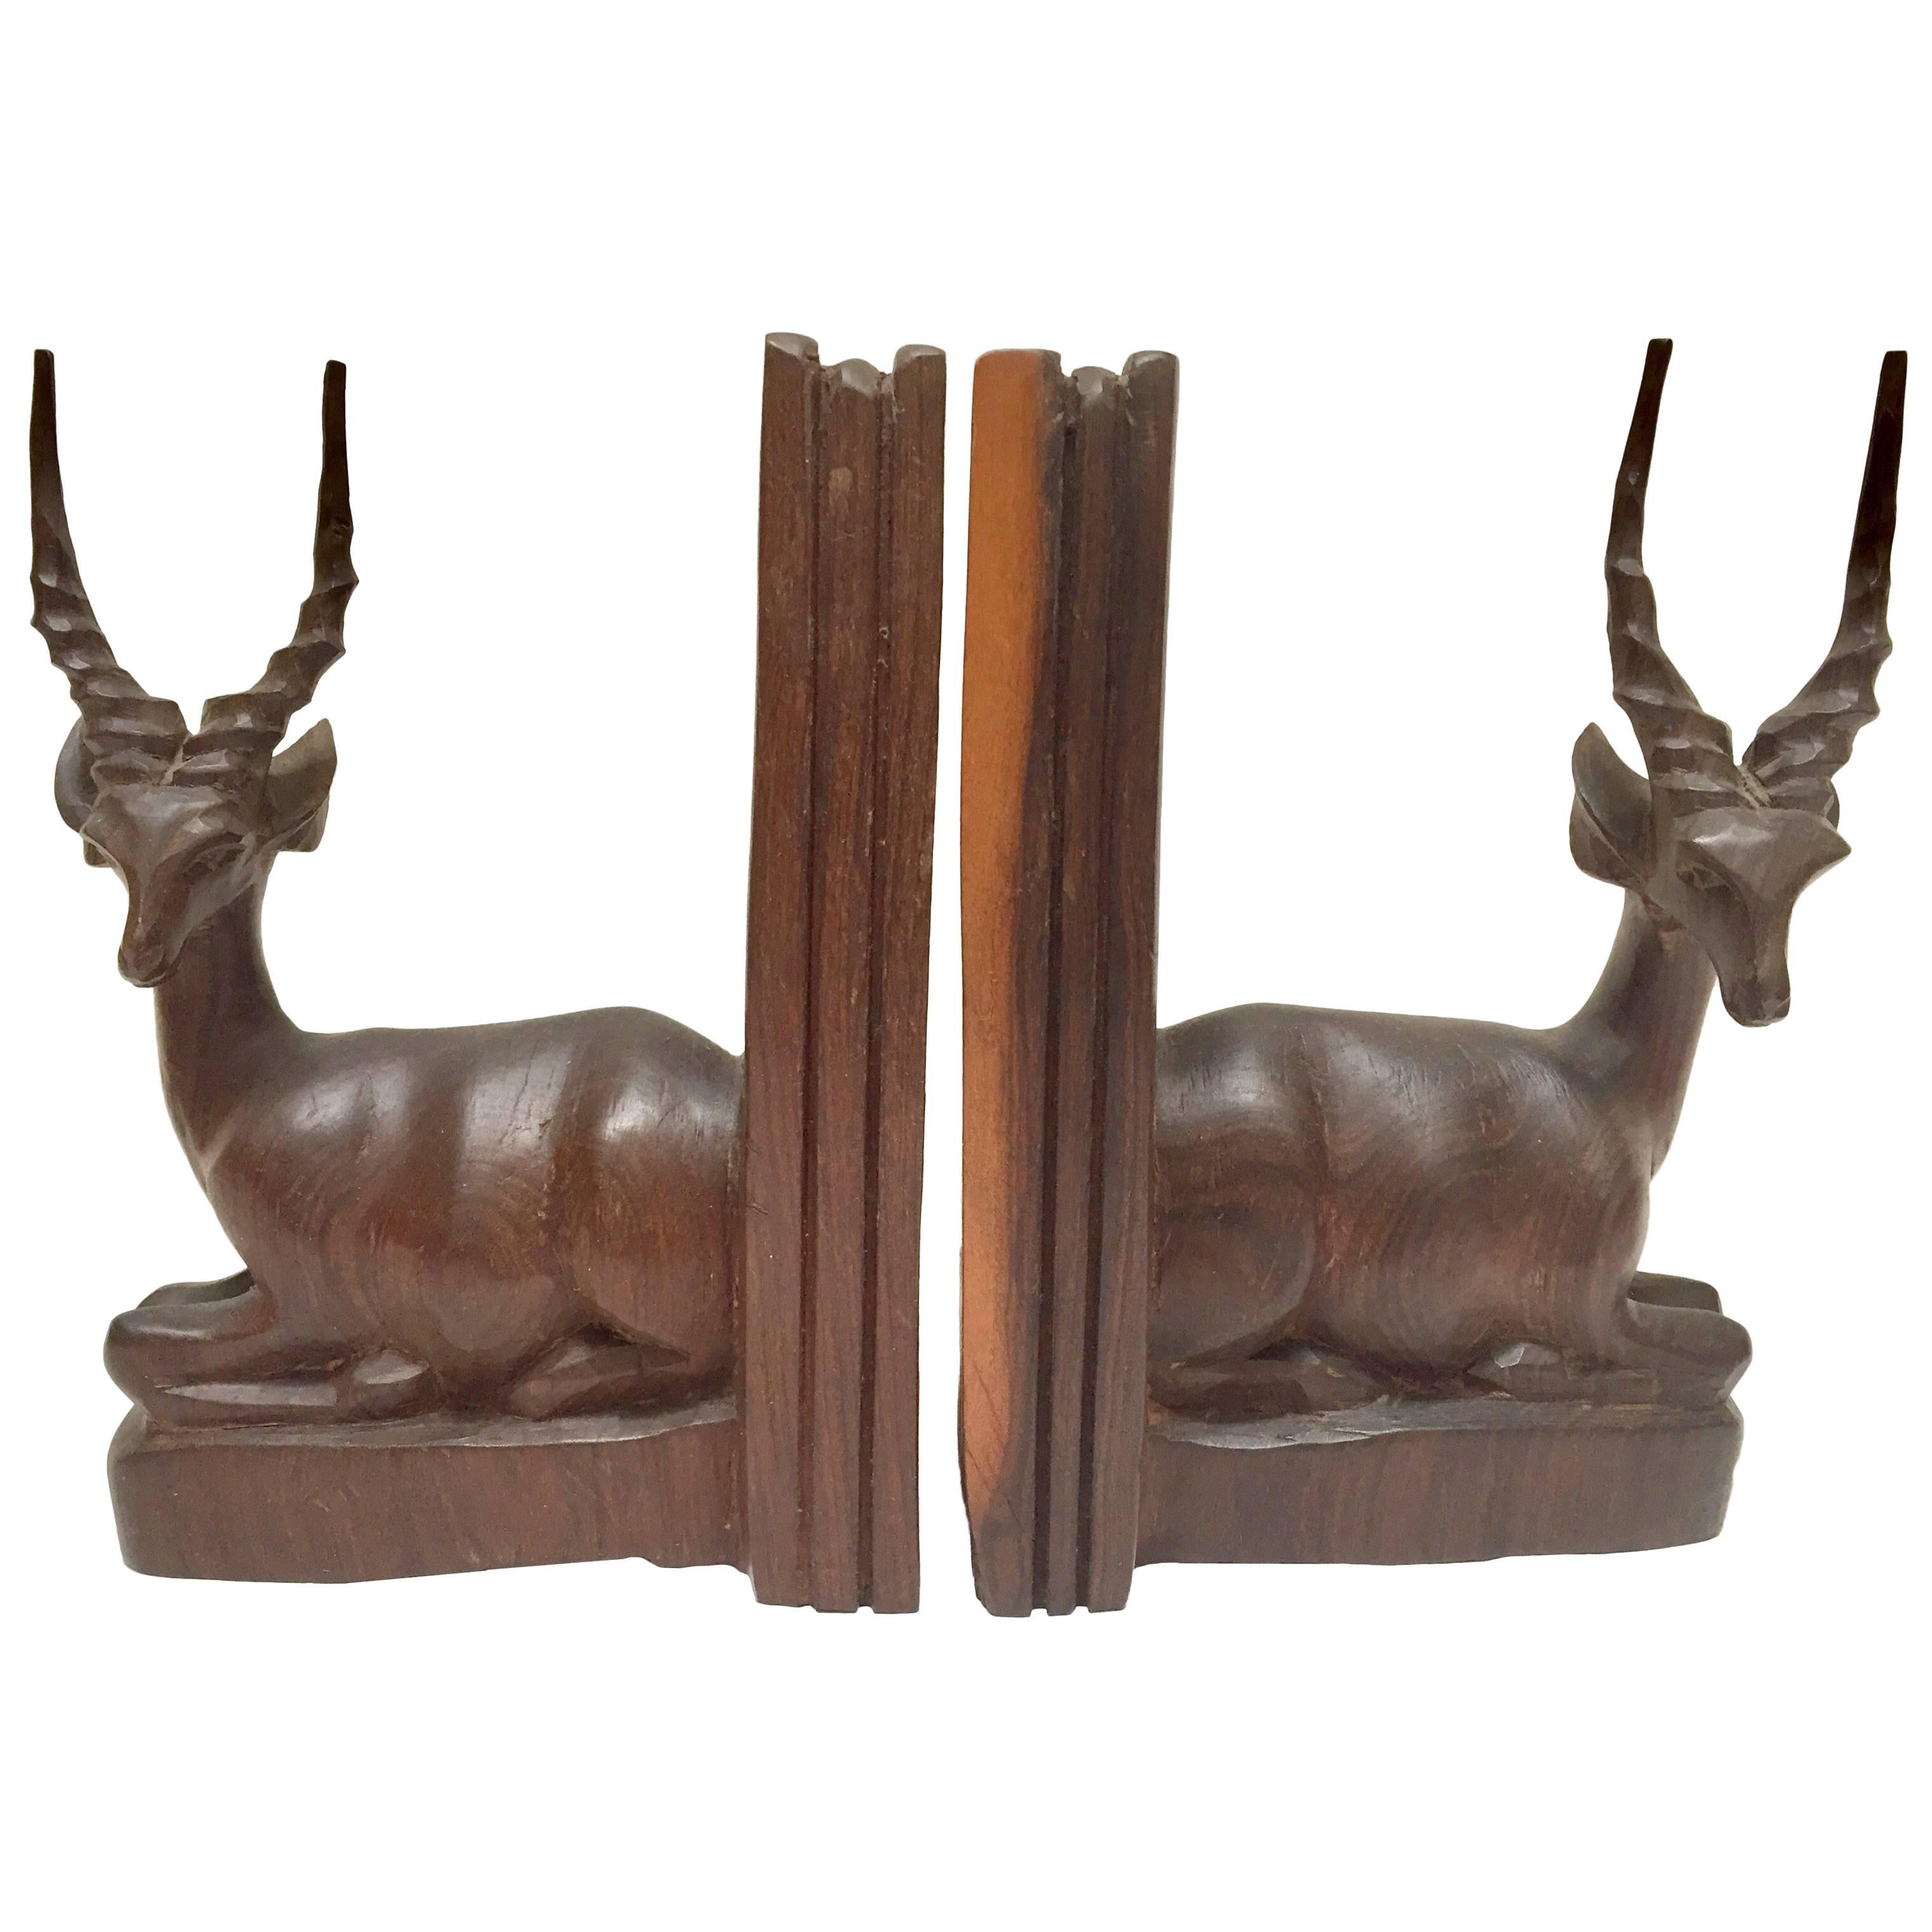 Hand-Carved Wooden Mid-Century Antelope Sculptures Bookends